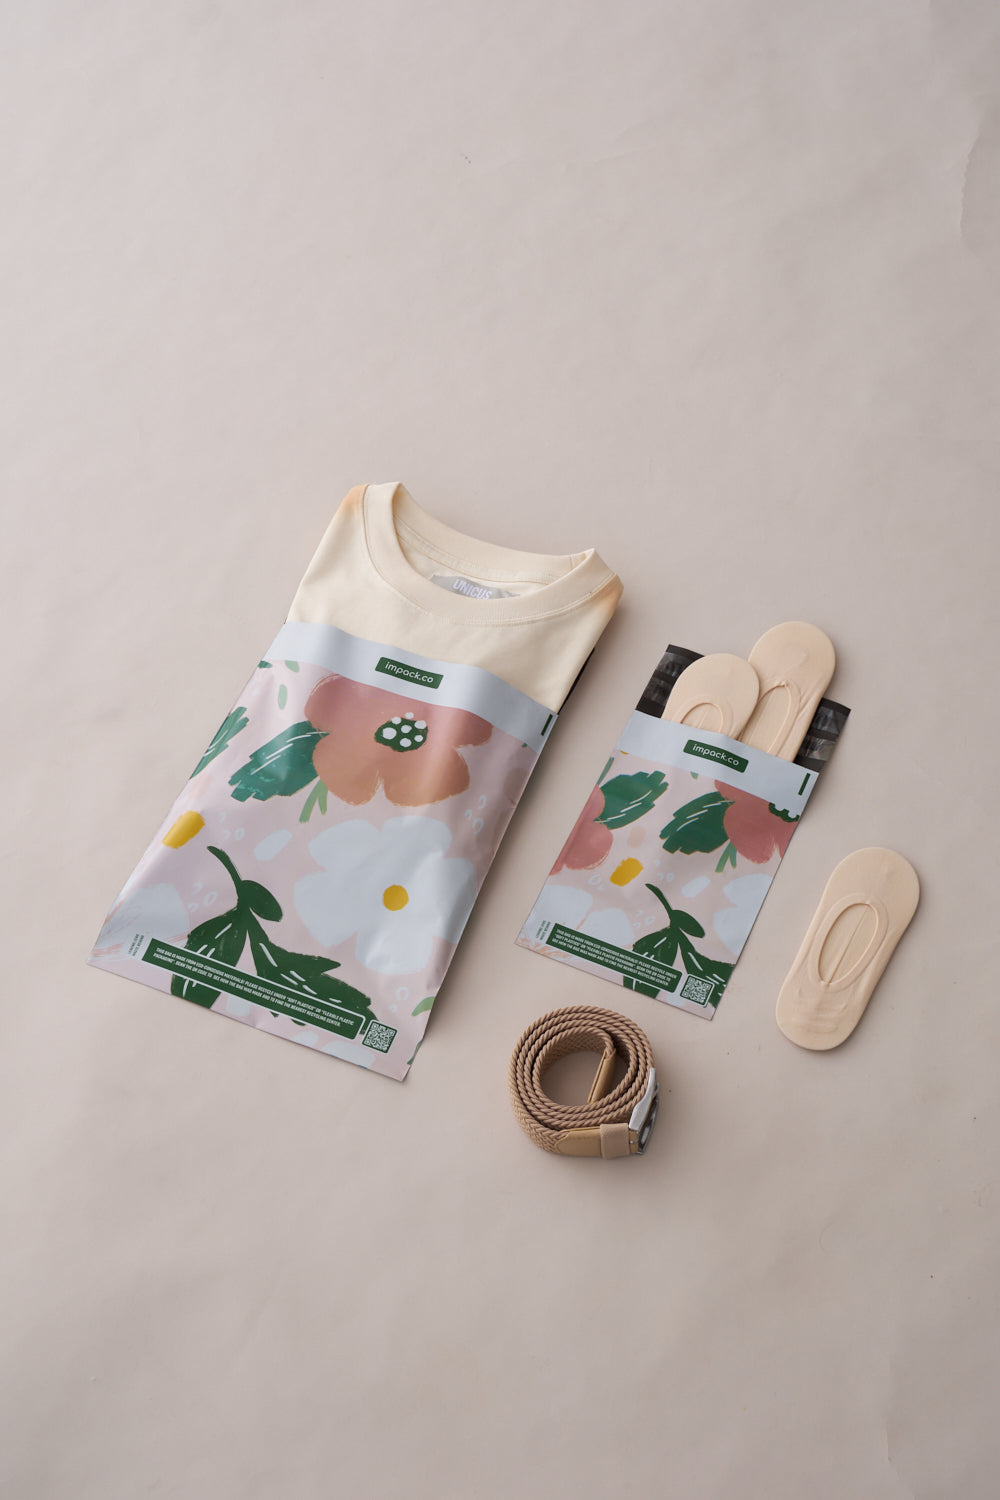 A folded shirt, a folded pair of socks, a rolled-up belt, and a pair of shoe insoles are arranged on a light-colored surface with impack.co Pastel Petals Mailers 10" x 13" nearby for transit protection.